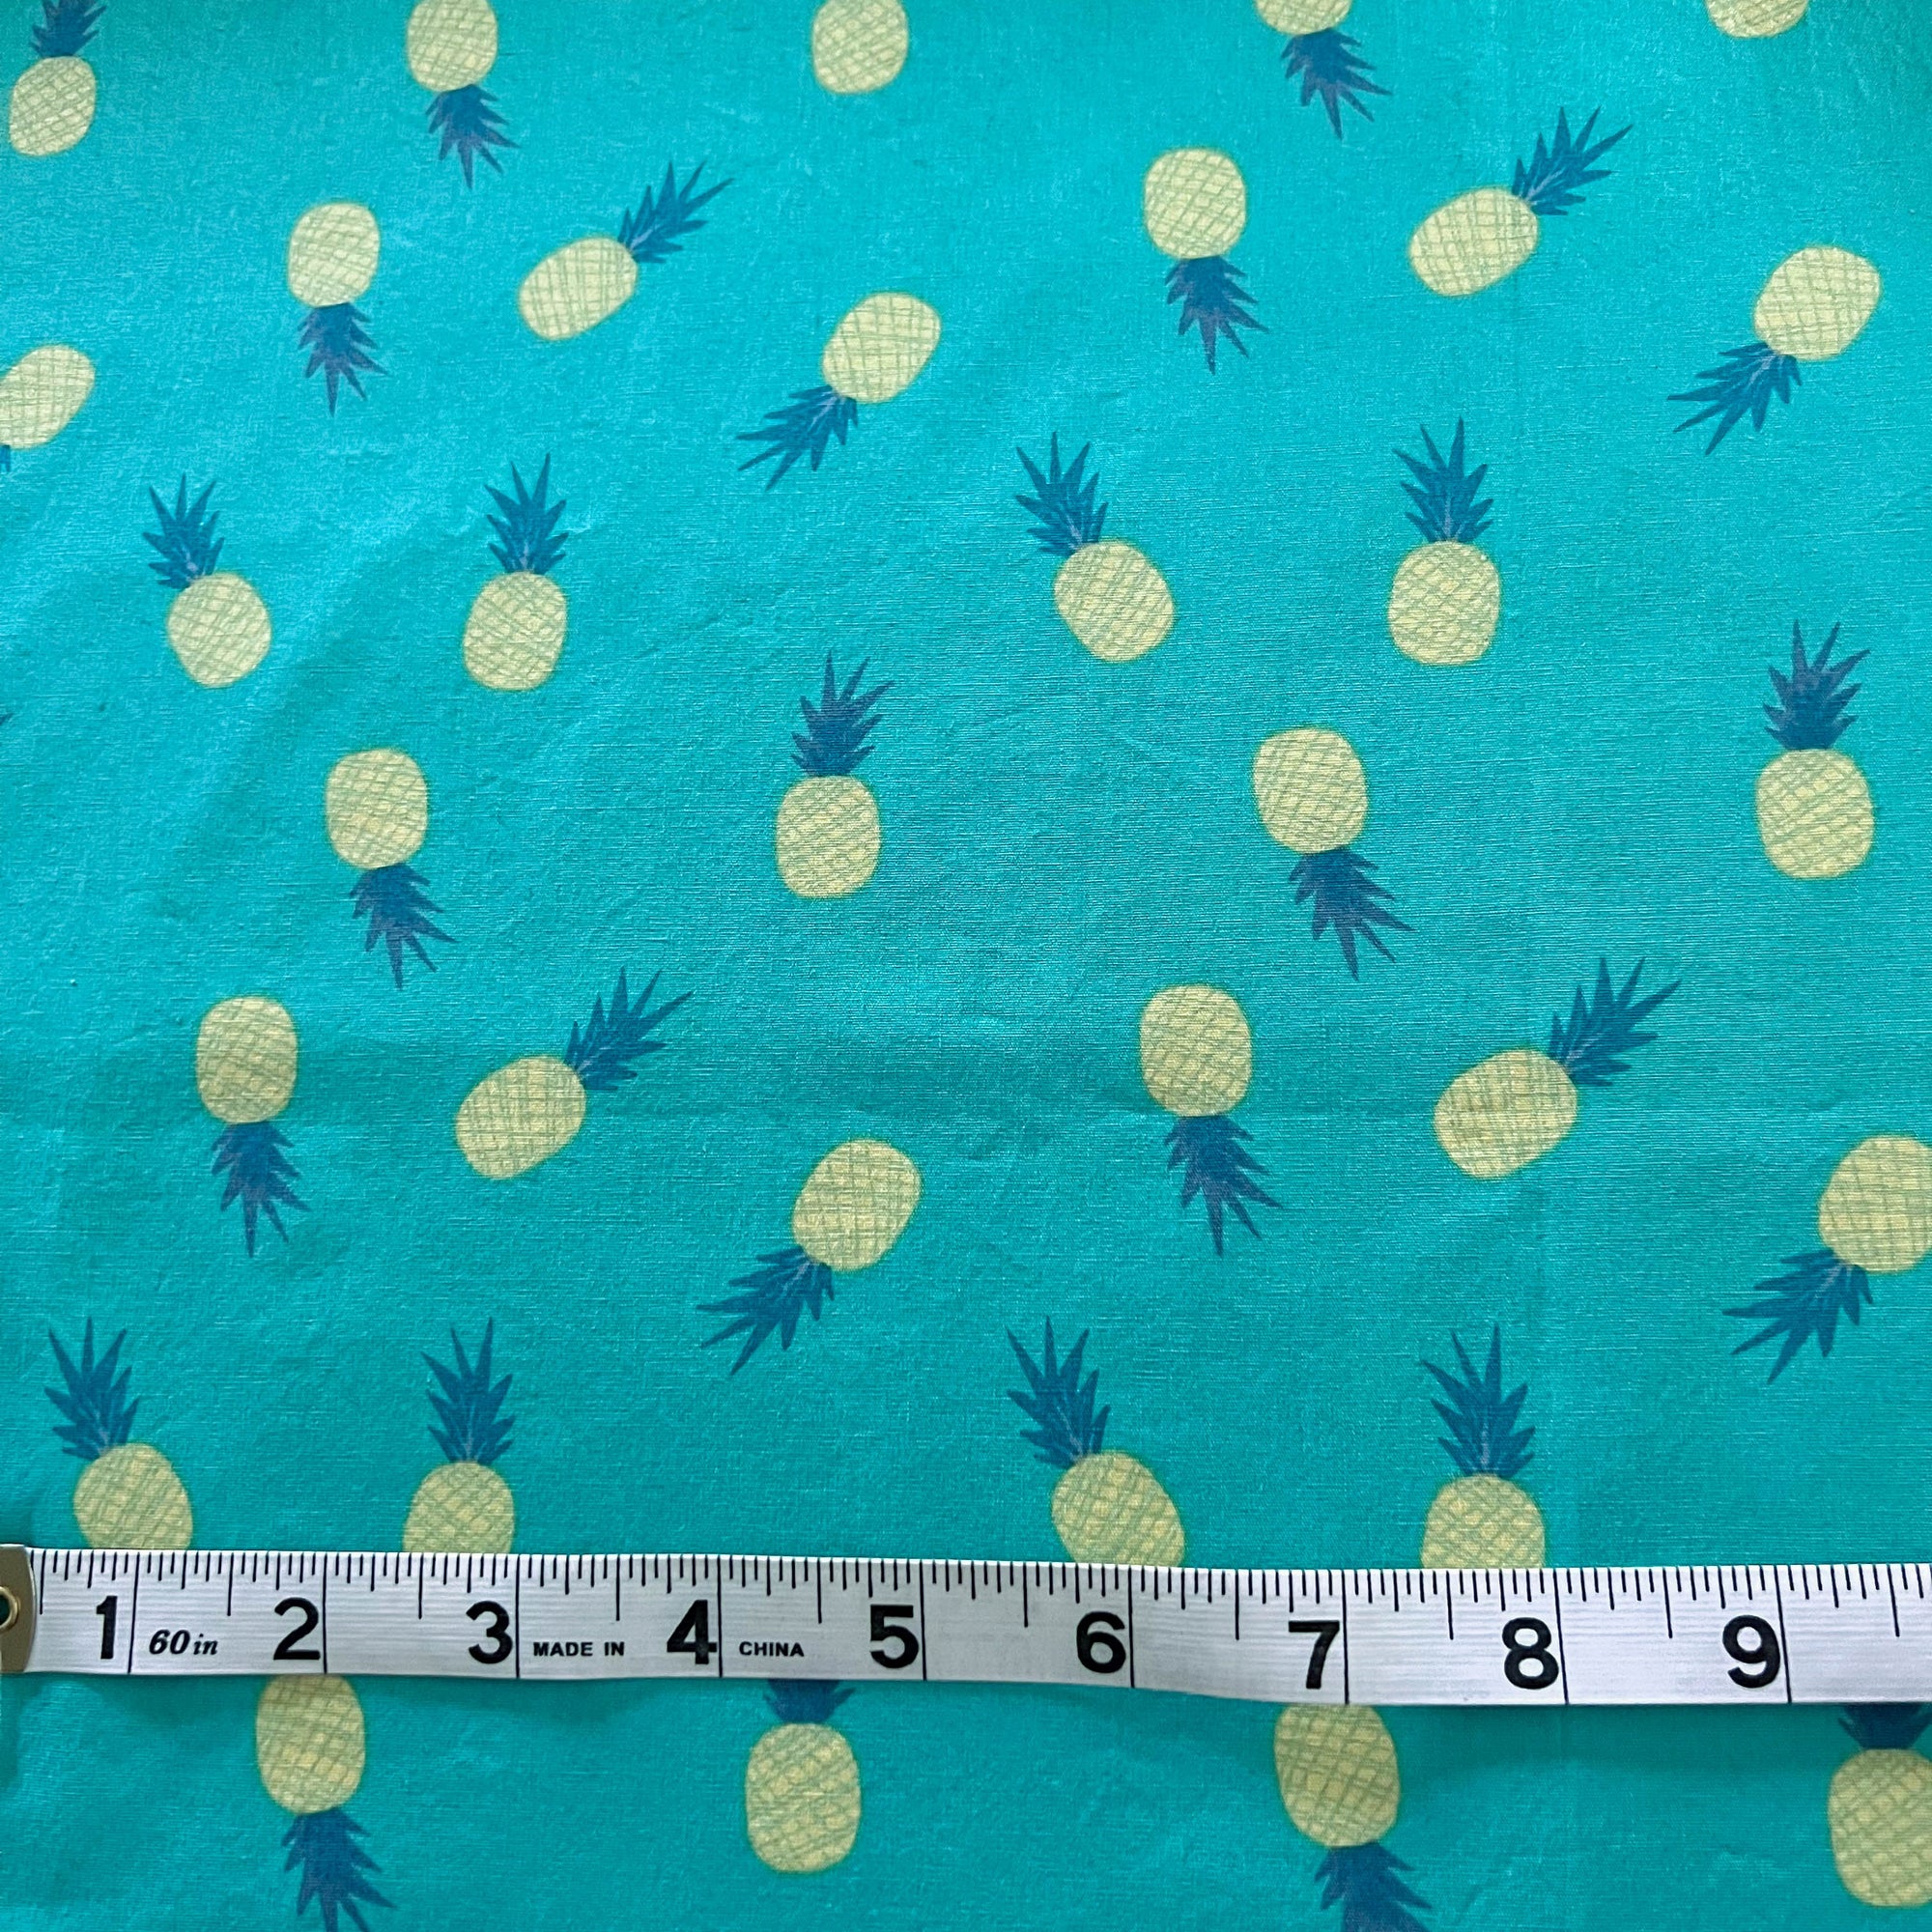 Ananas Aqua Pineapples Cotton Fabric by Jessica Swift - Fabric by the Yard